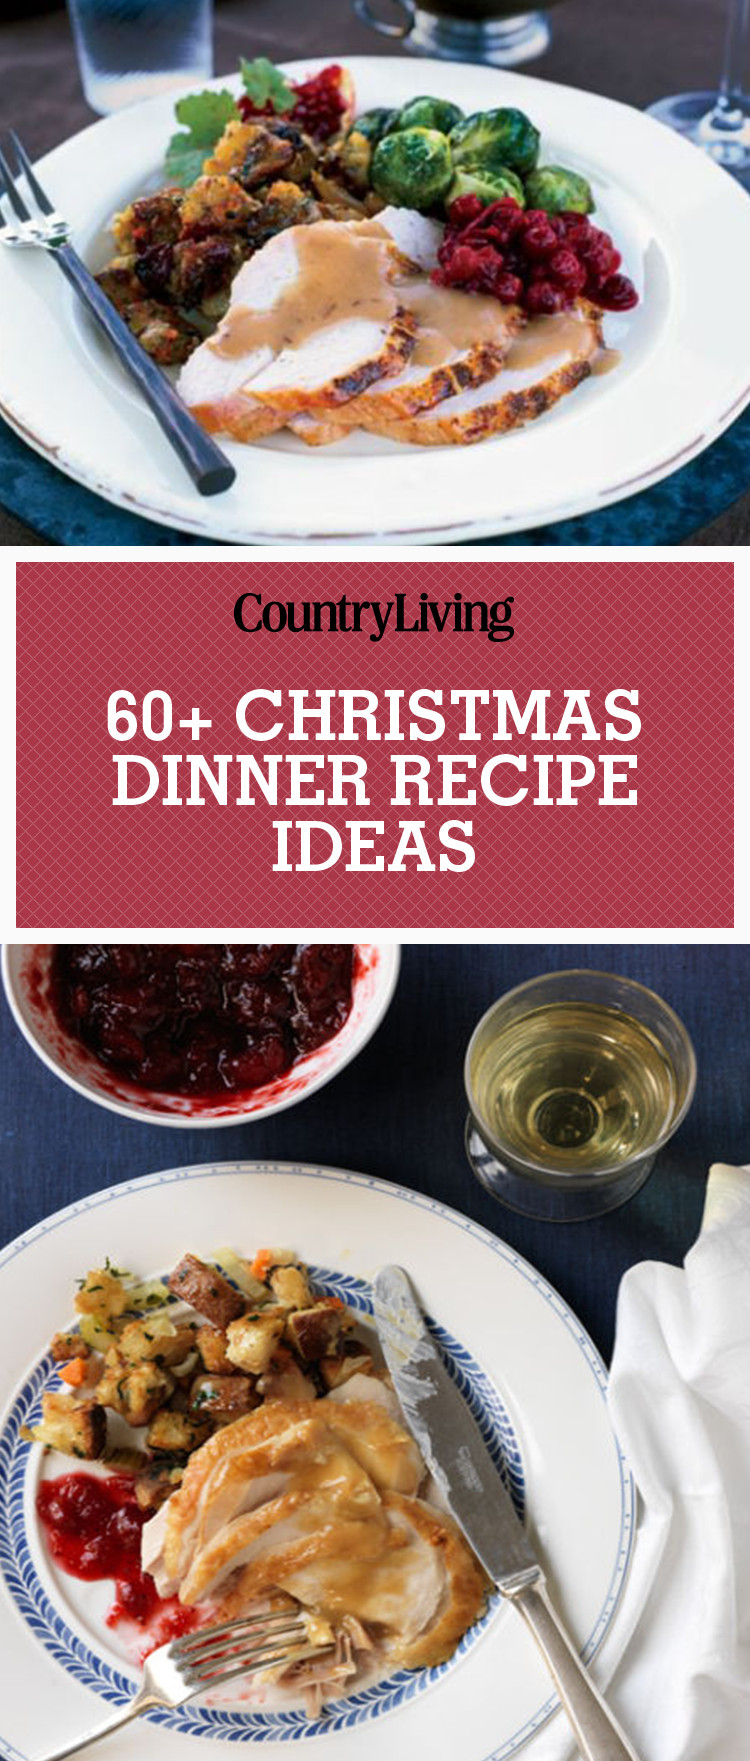 Food For Christmas Dinner
 70 Easy Christmas Dinner Ideas Best Holiday Meal Recipes